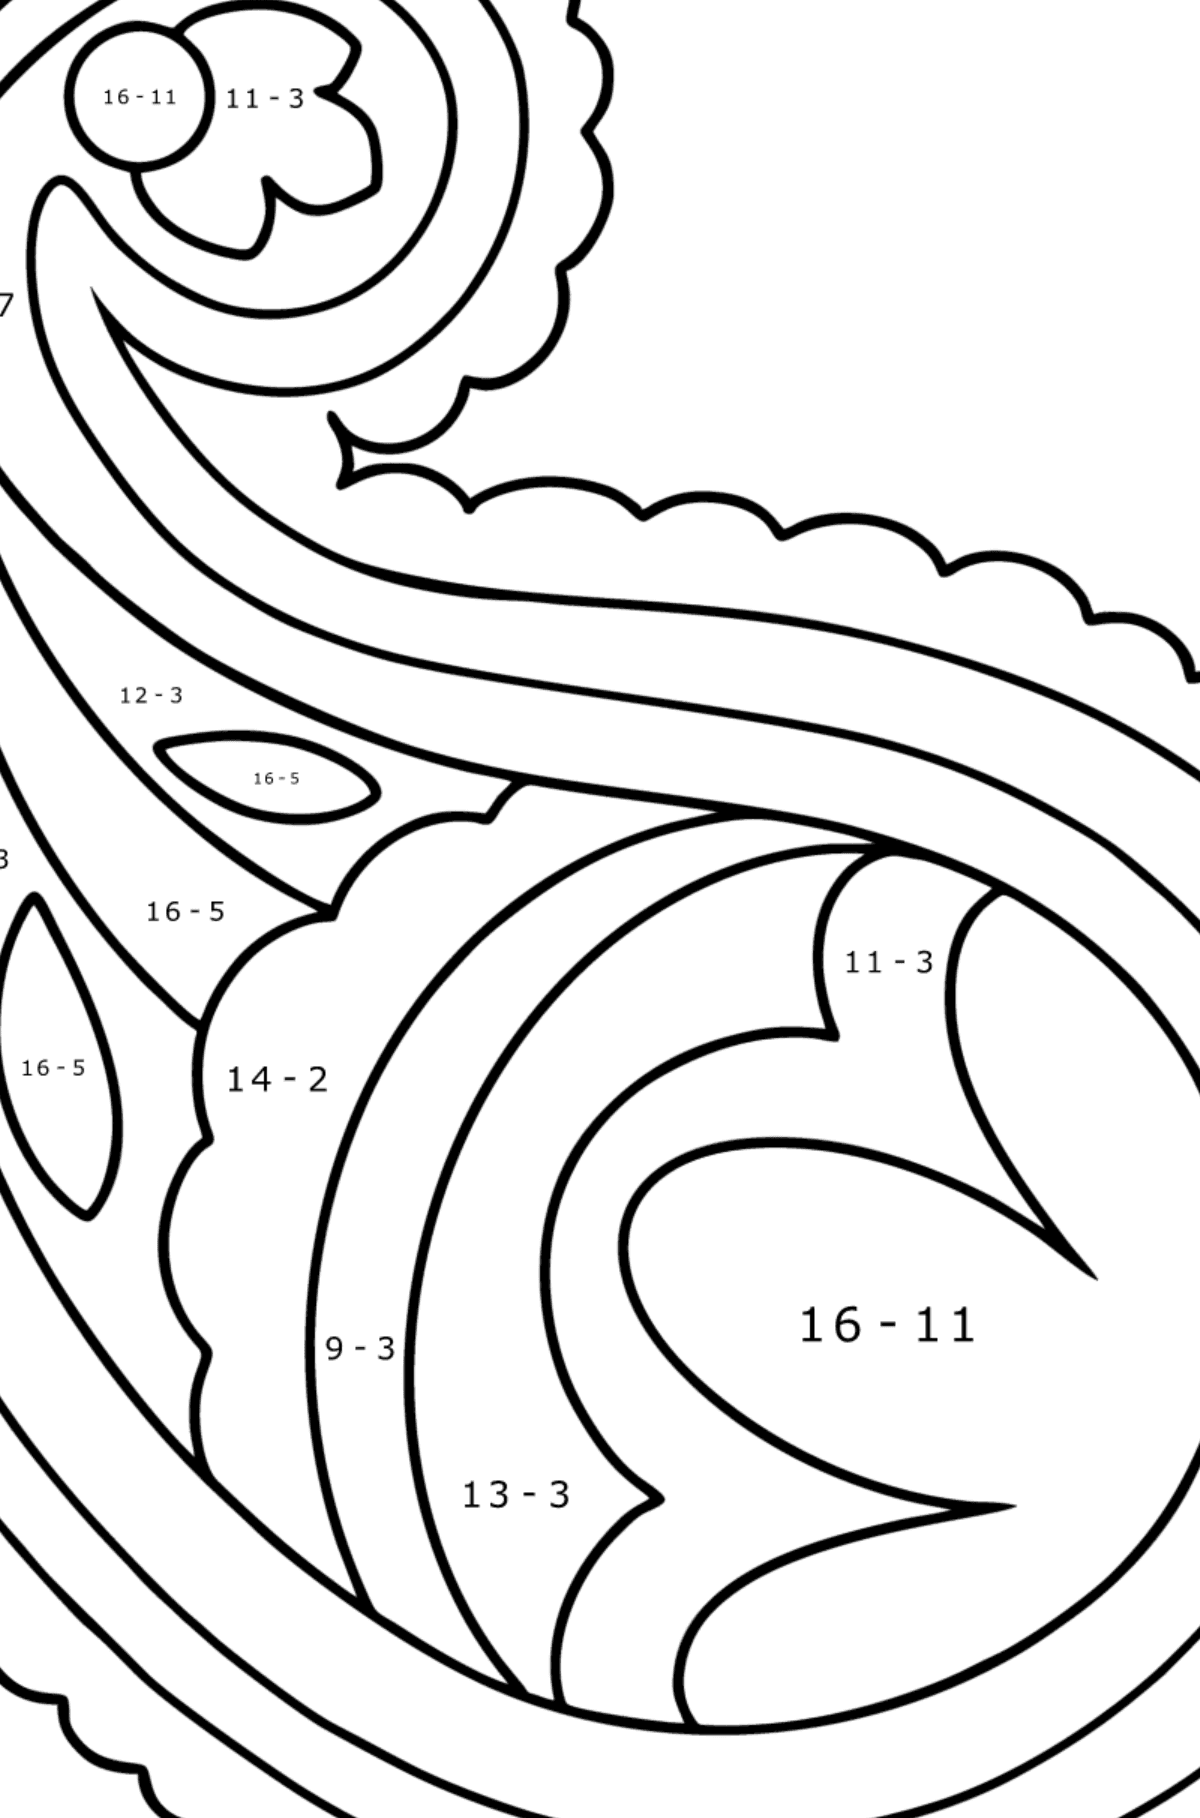 Paisley coloring page - 16 Elements - Math Coloring - Subtraction for Kids